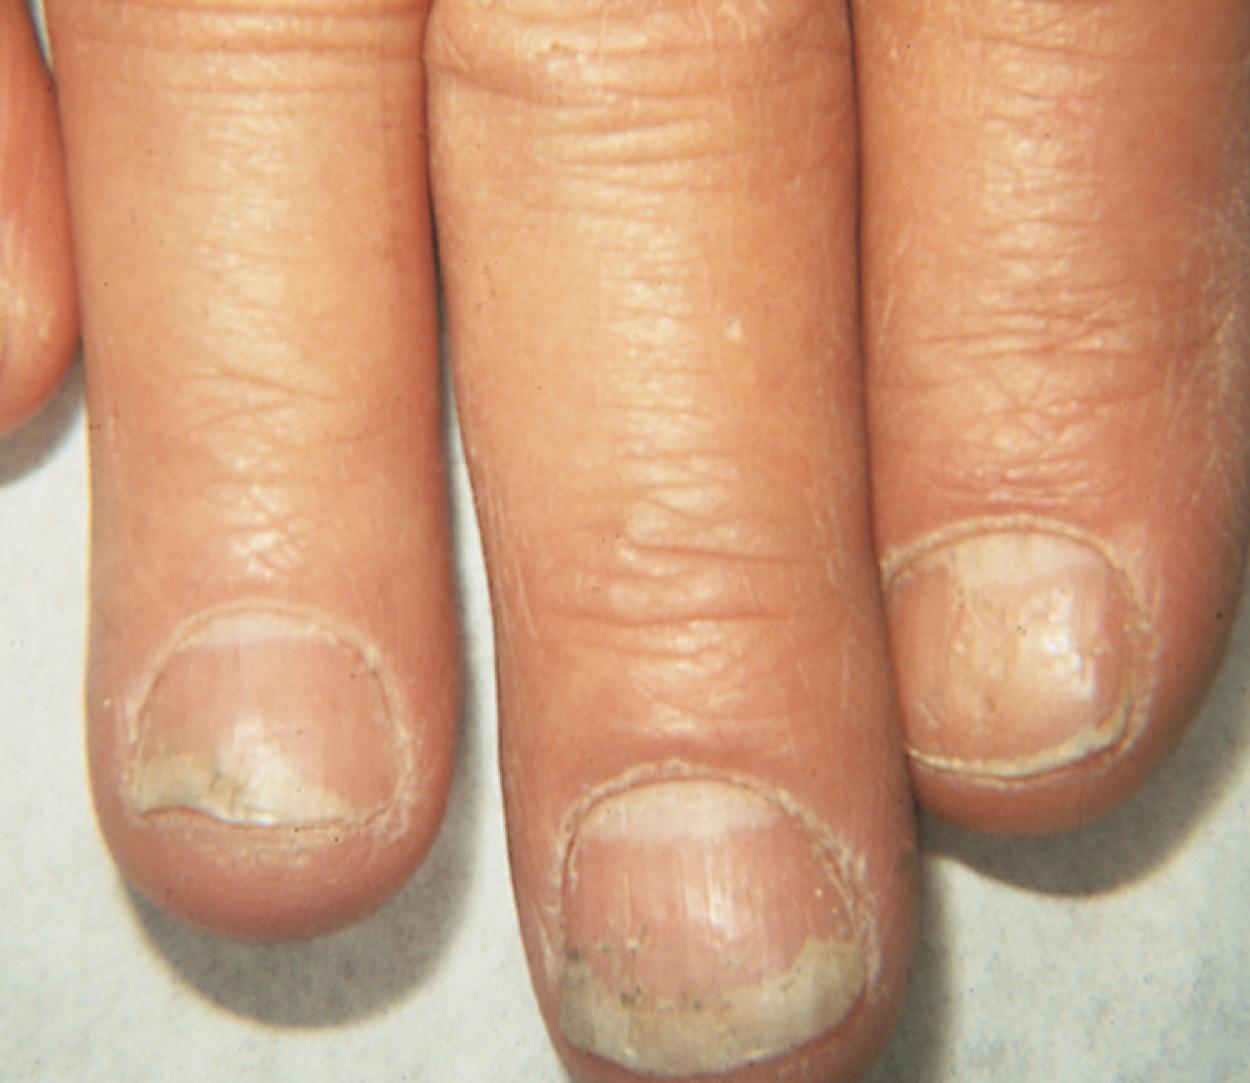 Fig. 8.140, Psoriatic nails. Psoriasis affecting the nails results in onycholysis and pitting.